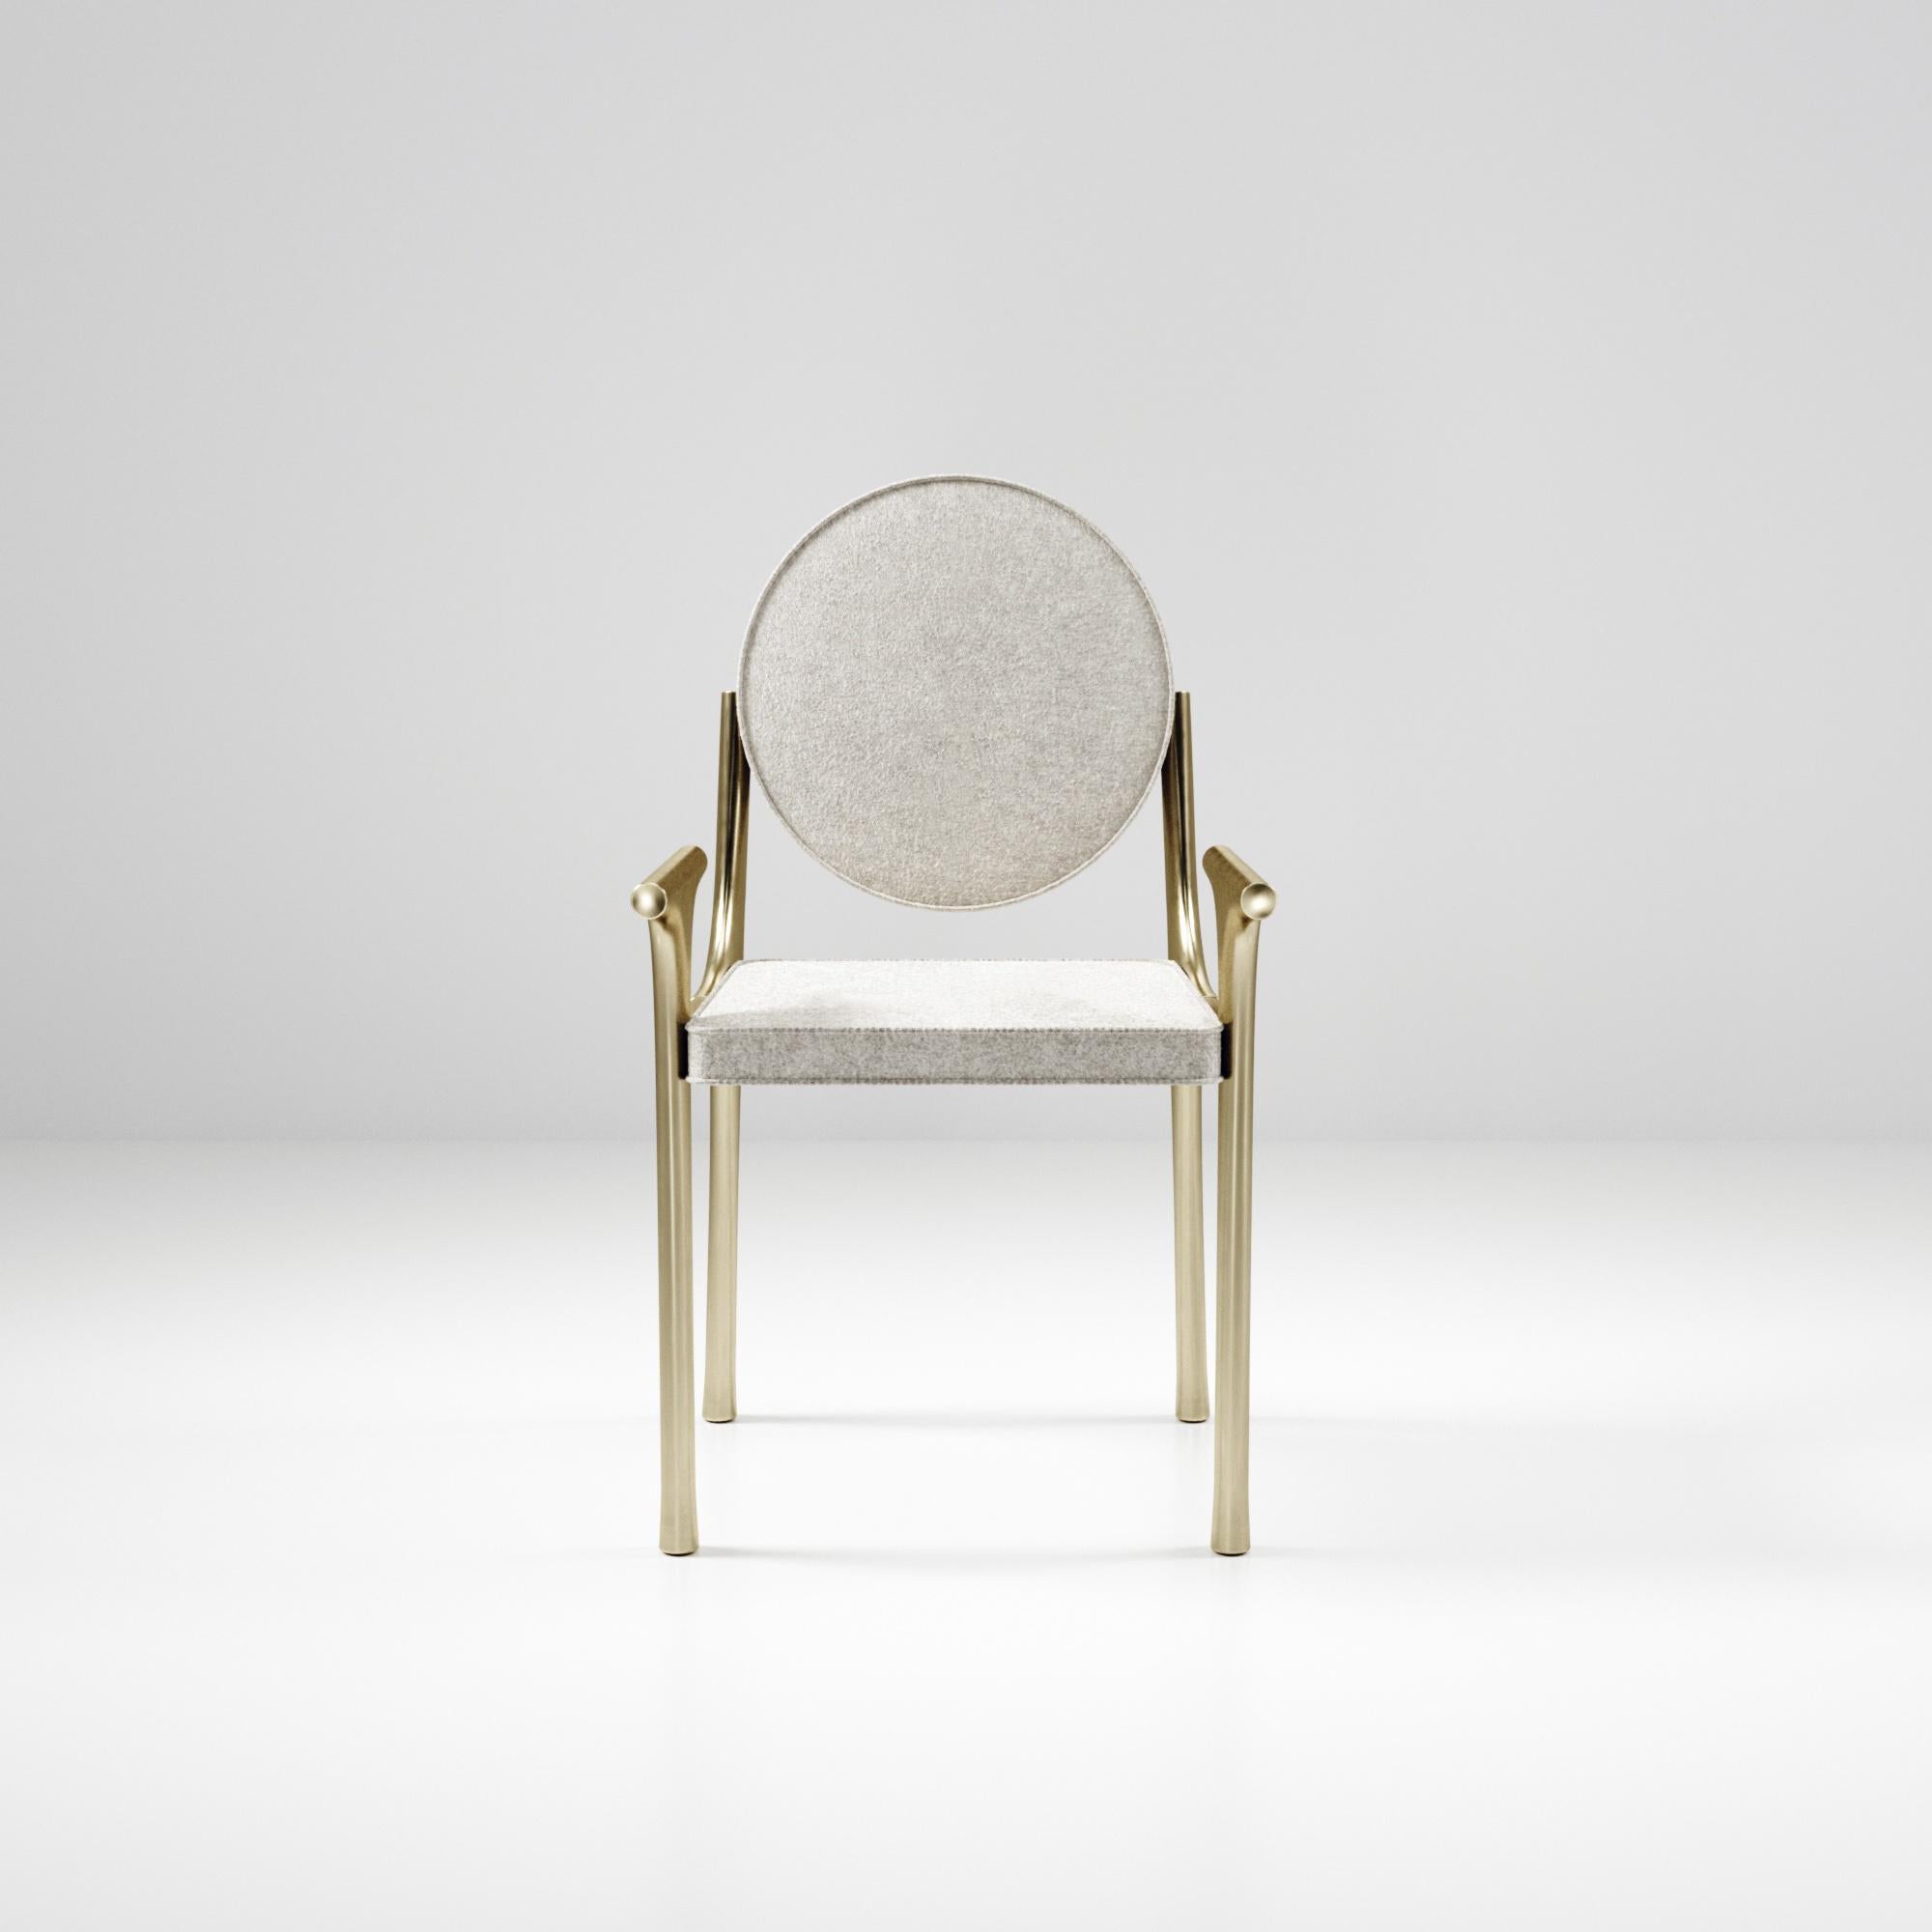 The Ramo chair by R & Y Augousti is an elegant and versatile piece. The upholstered piece provides comfort while retaining a unique aesthetic with the bronze-patina brass frame and details. This listing is priced for COM supply by client, see other